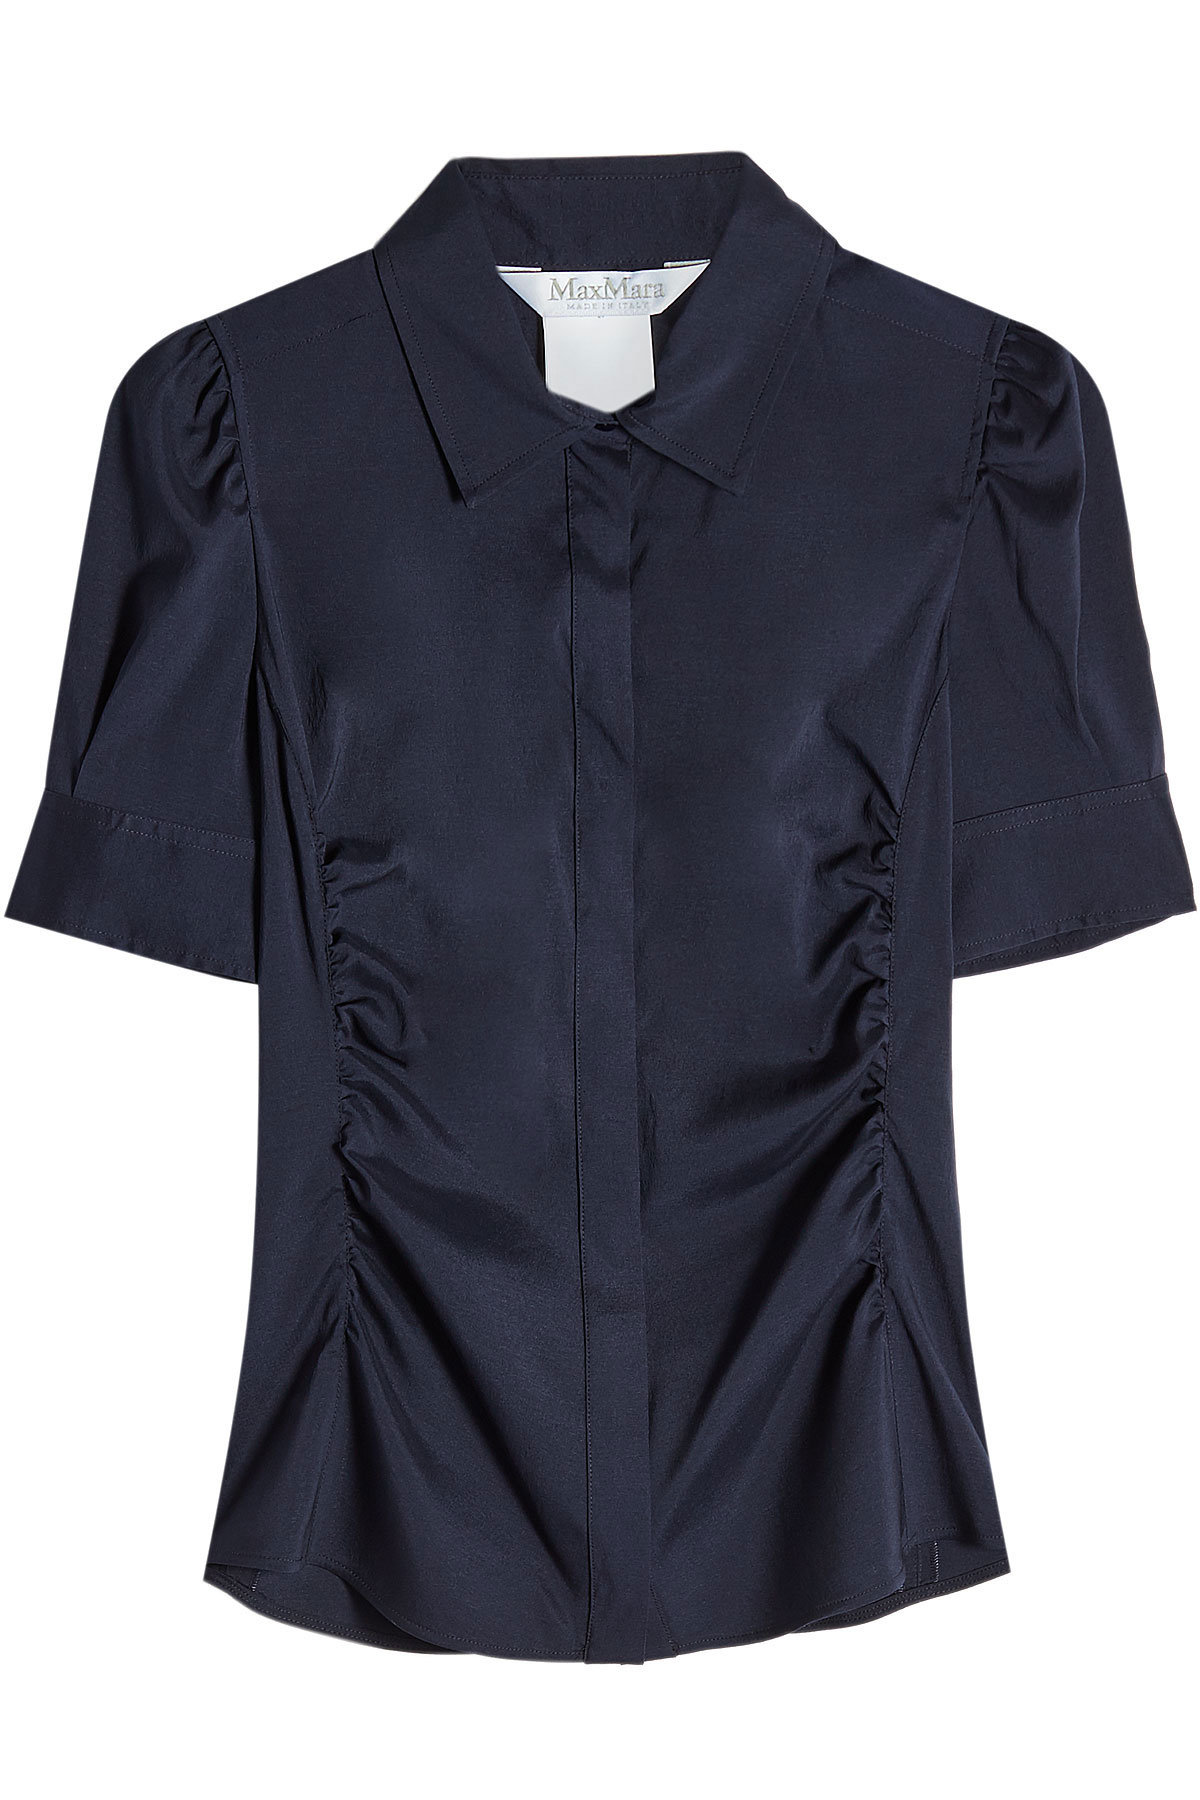 Blouse with Silk and Wool by Max Mara